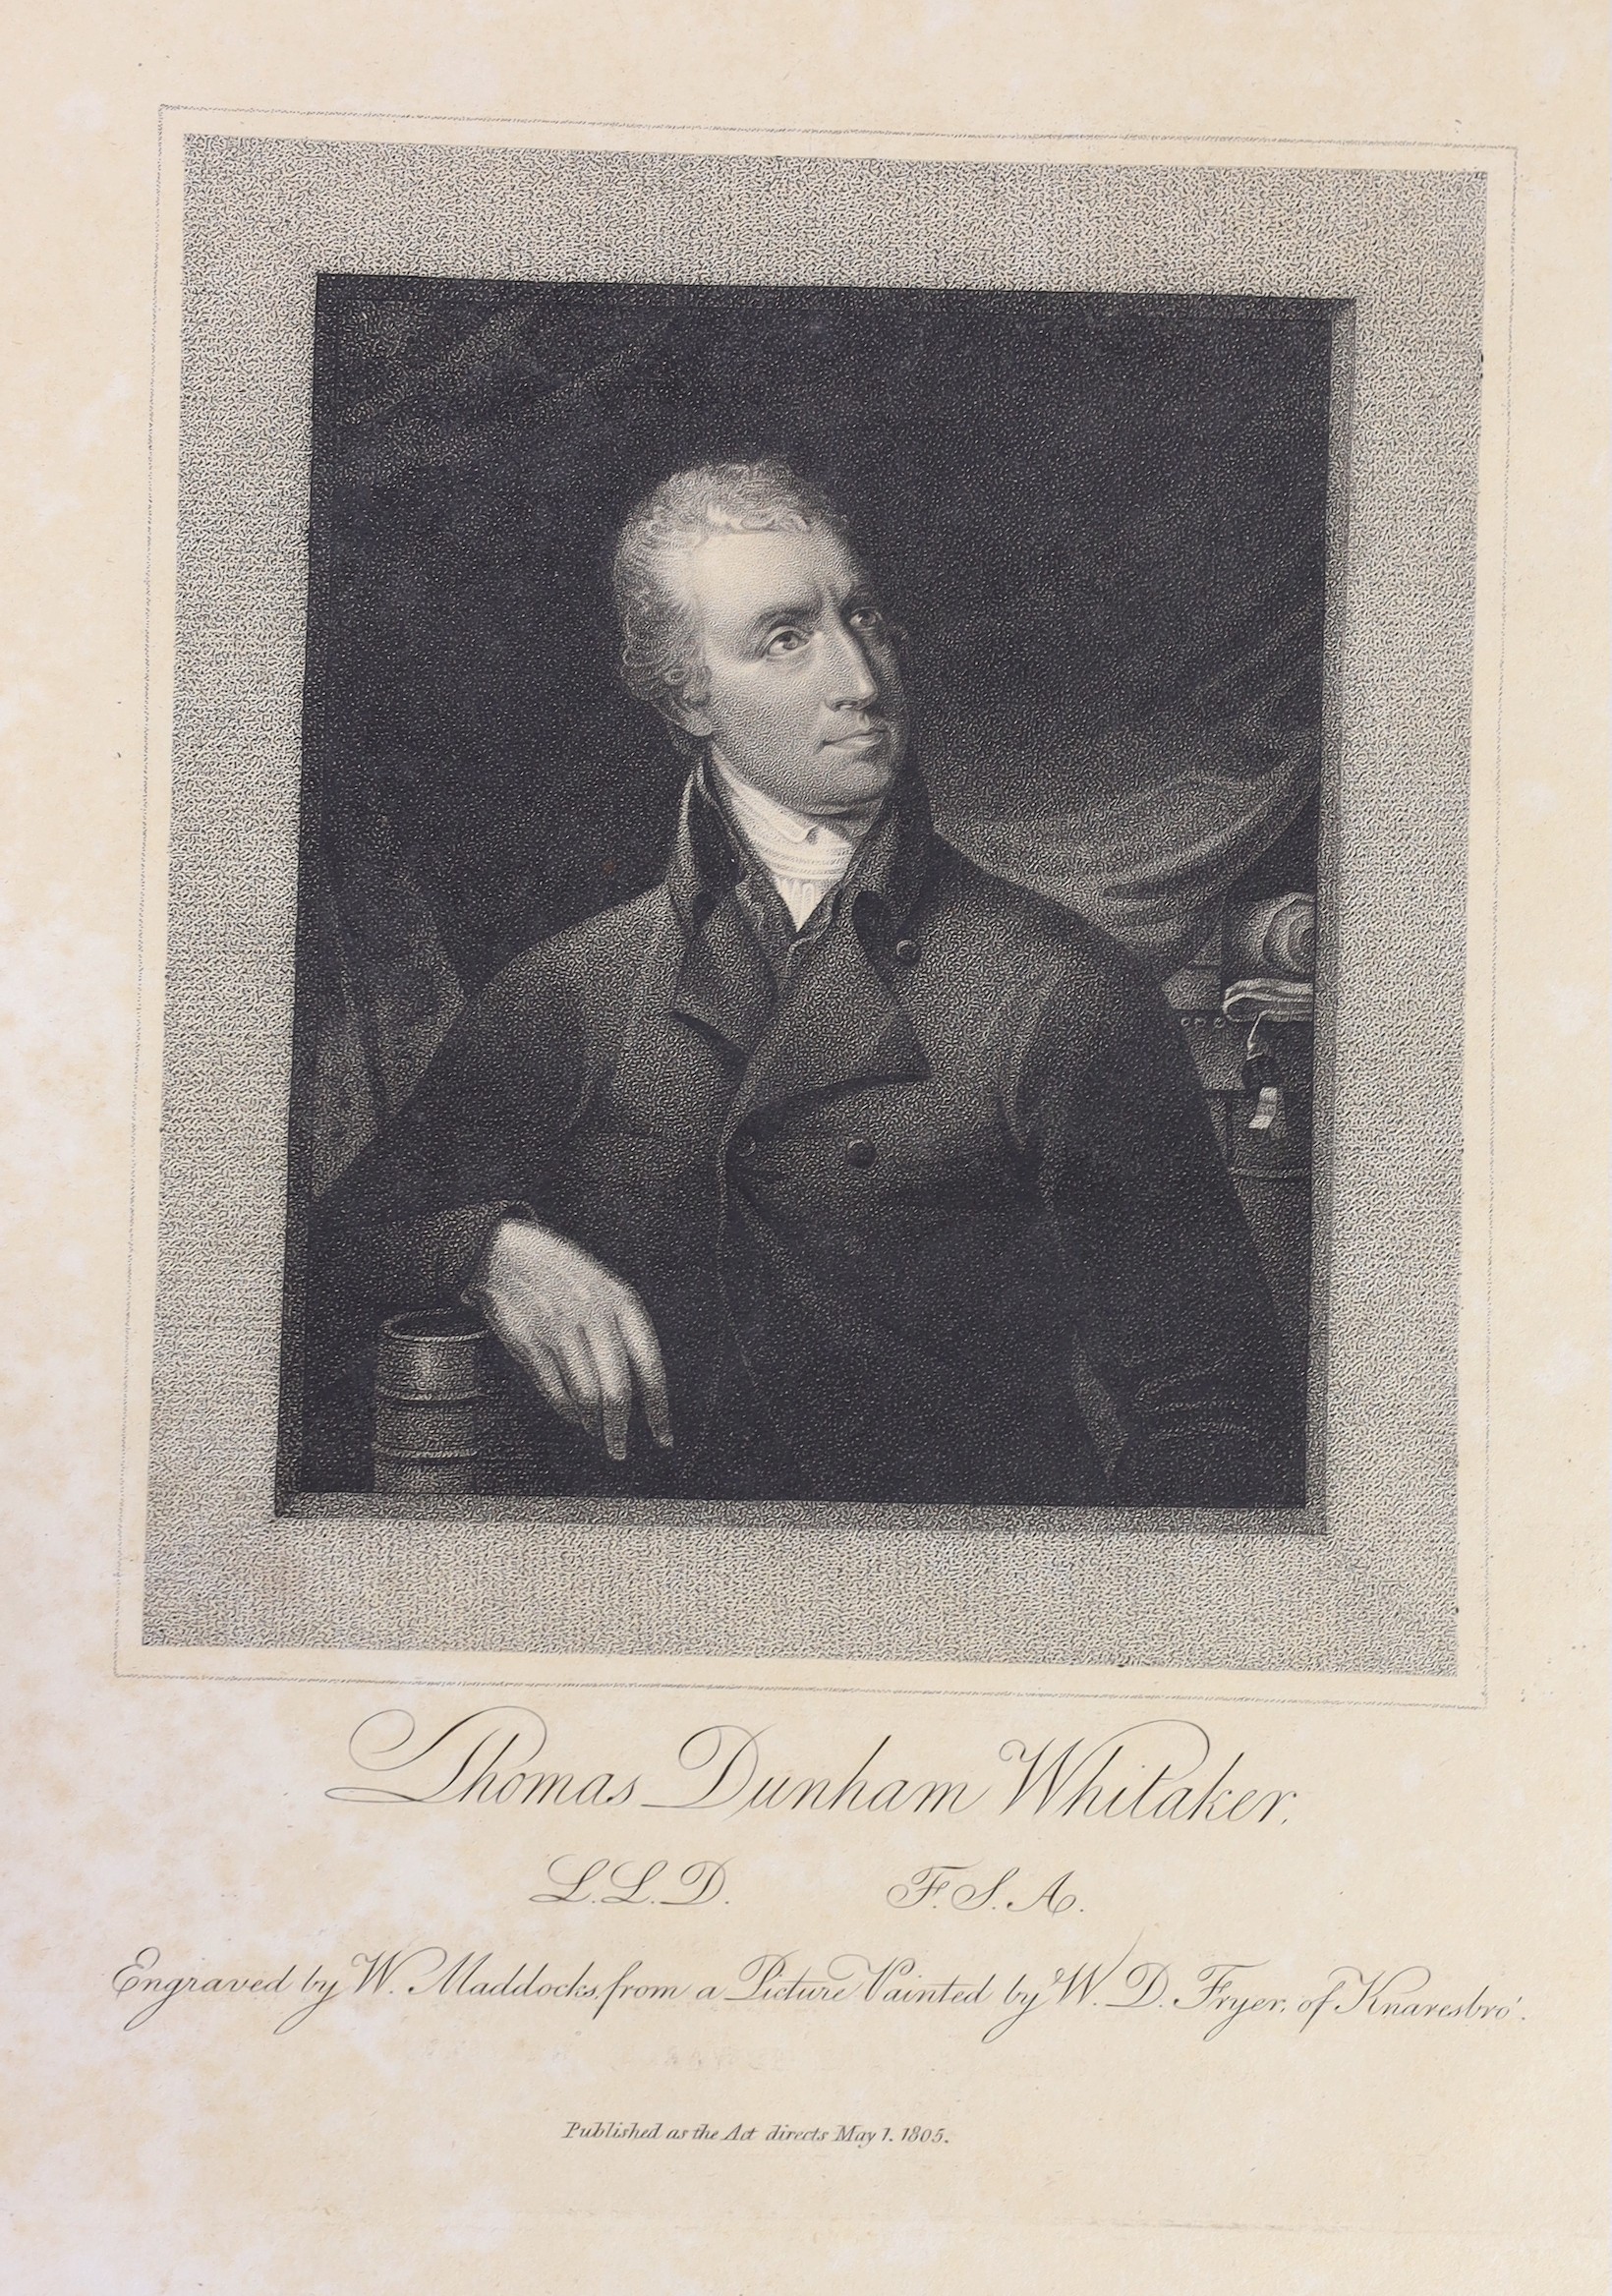 CRAVEN (YORKSHIRE) - Whitaker, Thomas Dunham - The History and Antiquities of the Deanery of Craven in the County of York, 4to, later cloth, with frontis portrait, 35 of 36 plates (lacking Clitheroe Castle [not in Yorksh